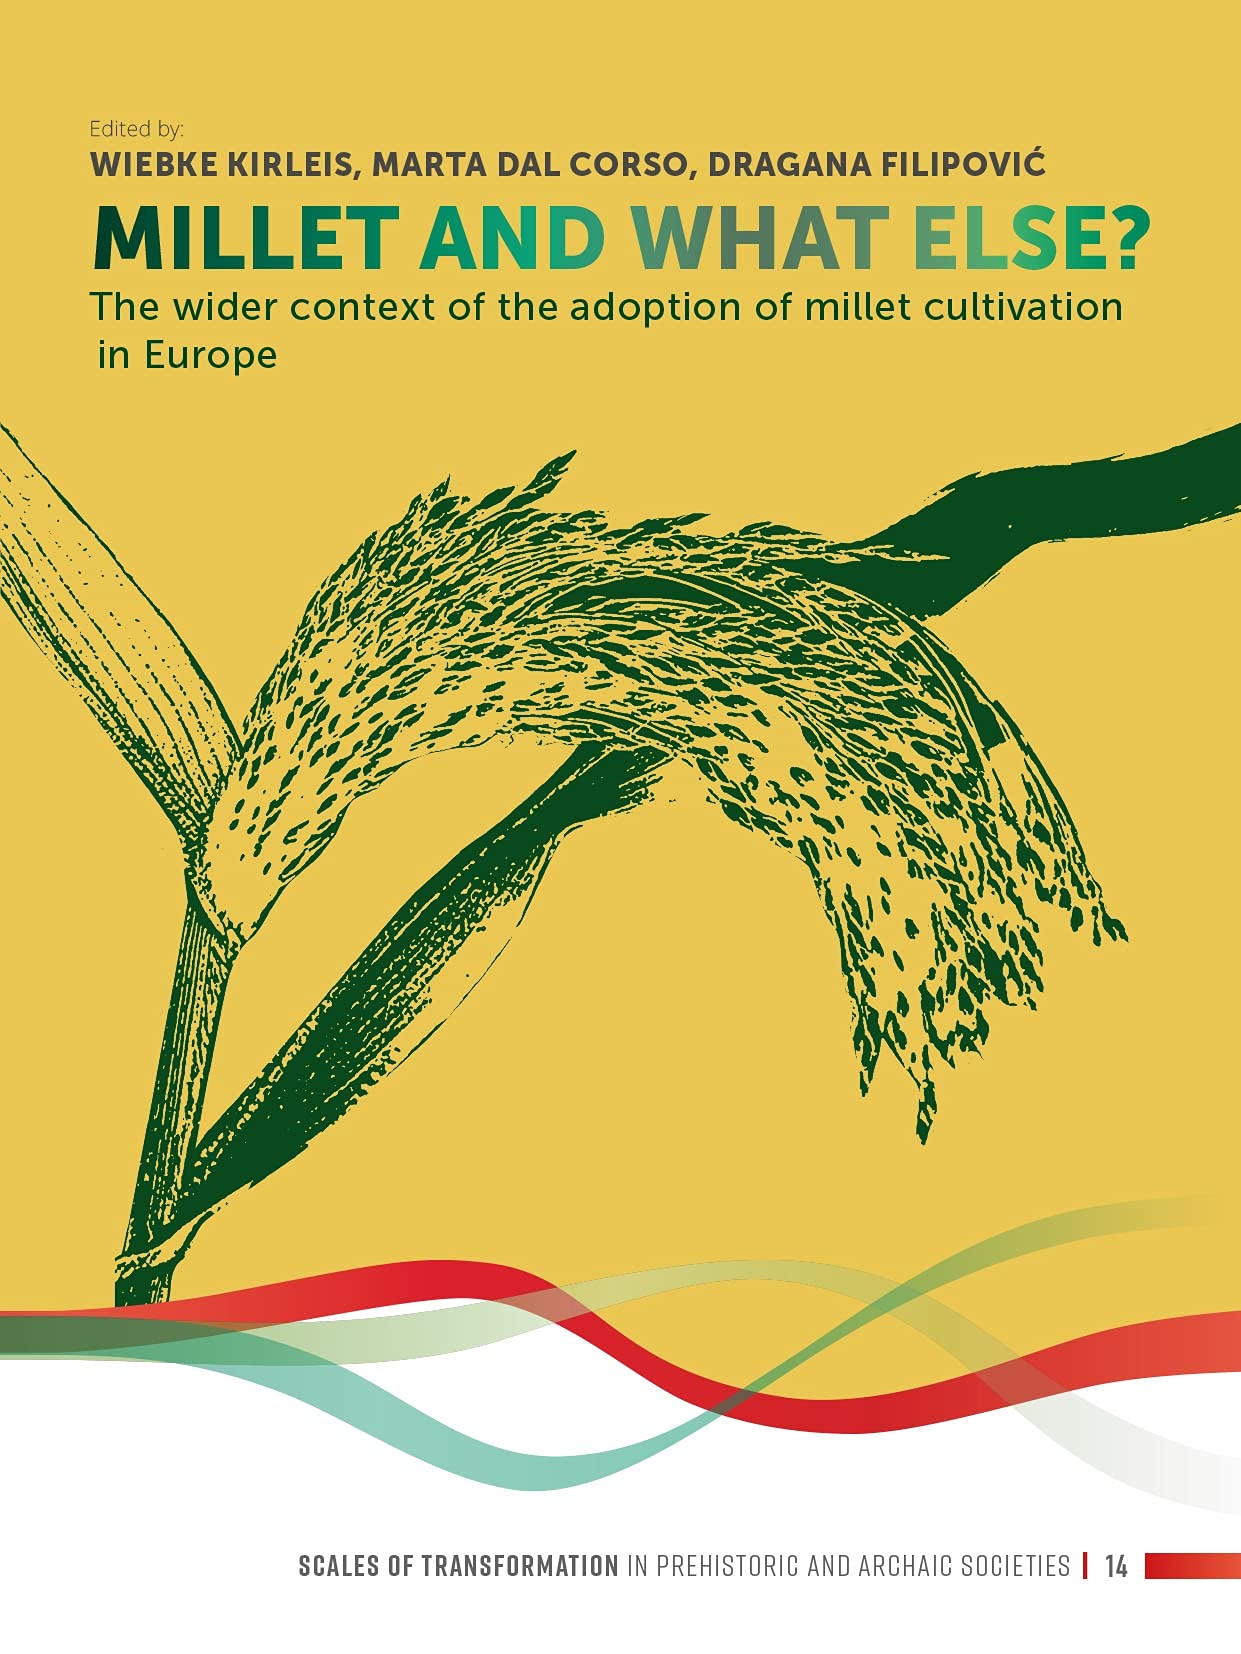 Millet and What Else? The Wider Context of the Adoption of Millet Cultivation in Europe, 2022, 328 p.